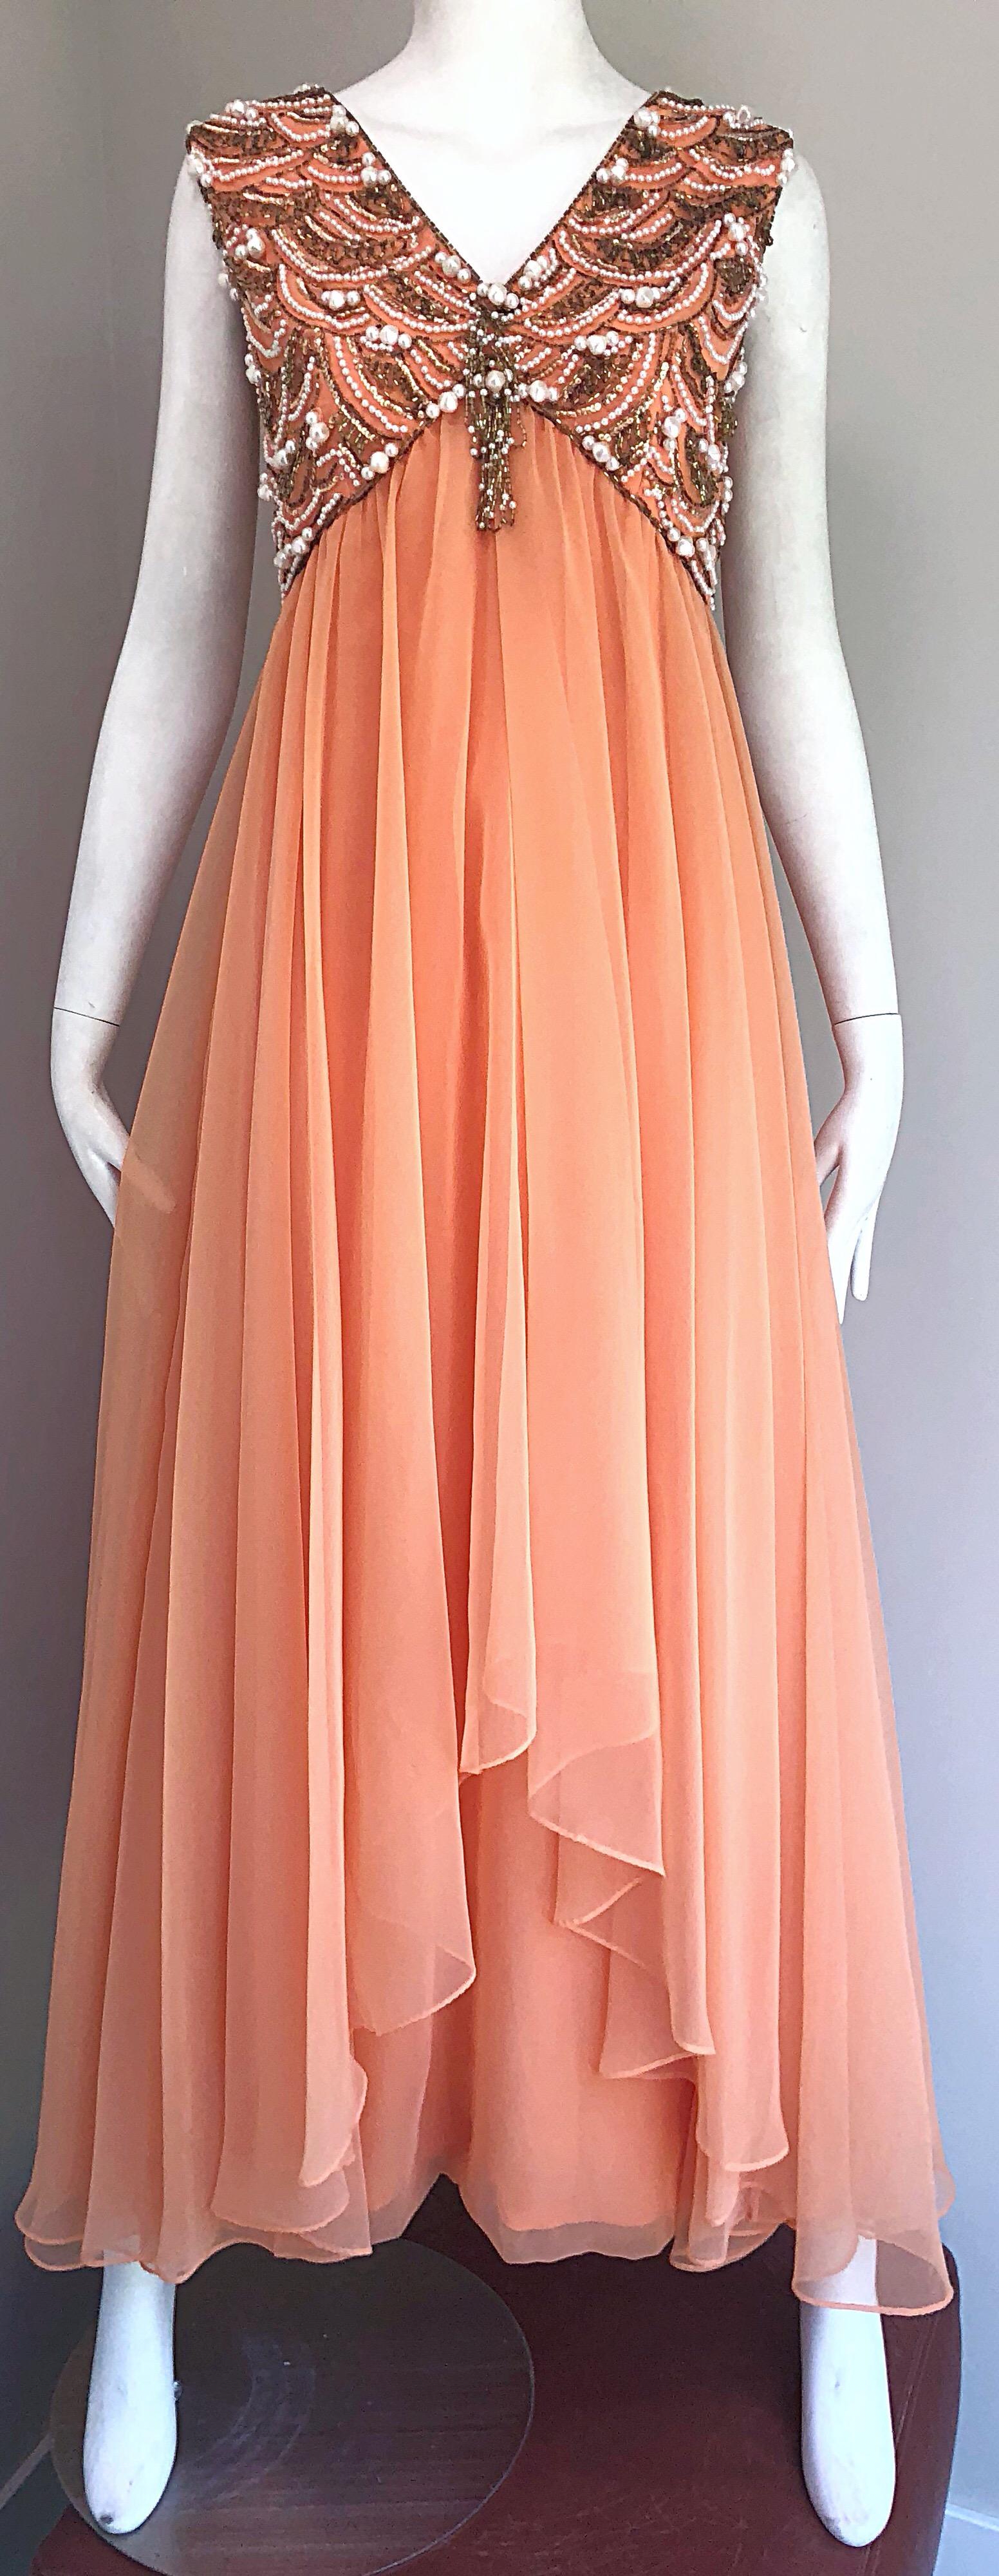 Women's 1960s Isabell Gerhart Sherbet Coral Demi Couture Beaded Chiffon 60s Gown Dress For Sale